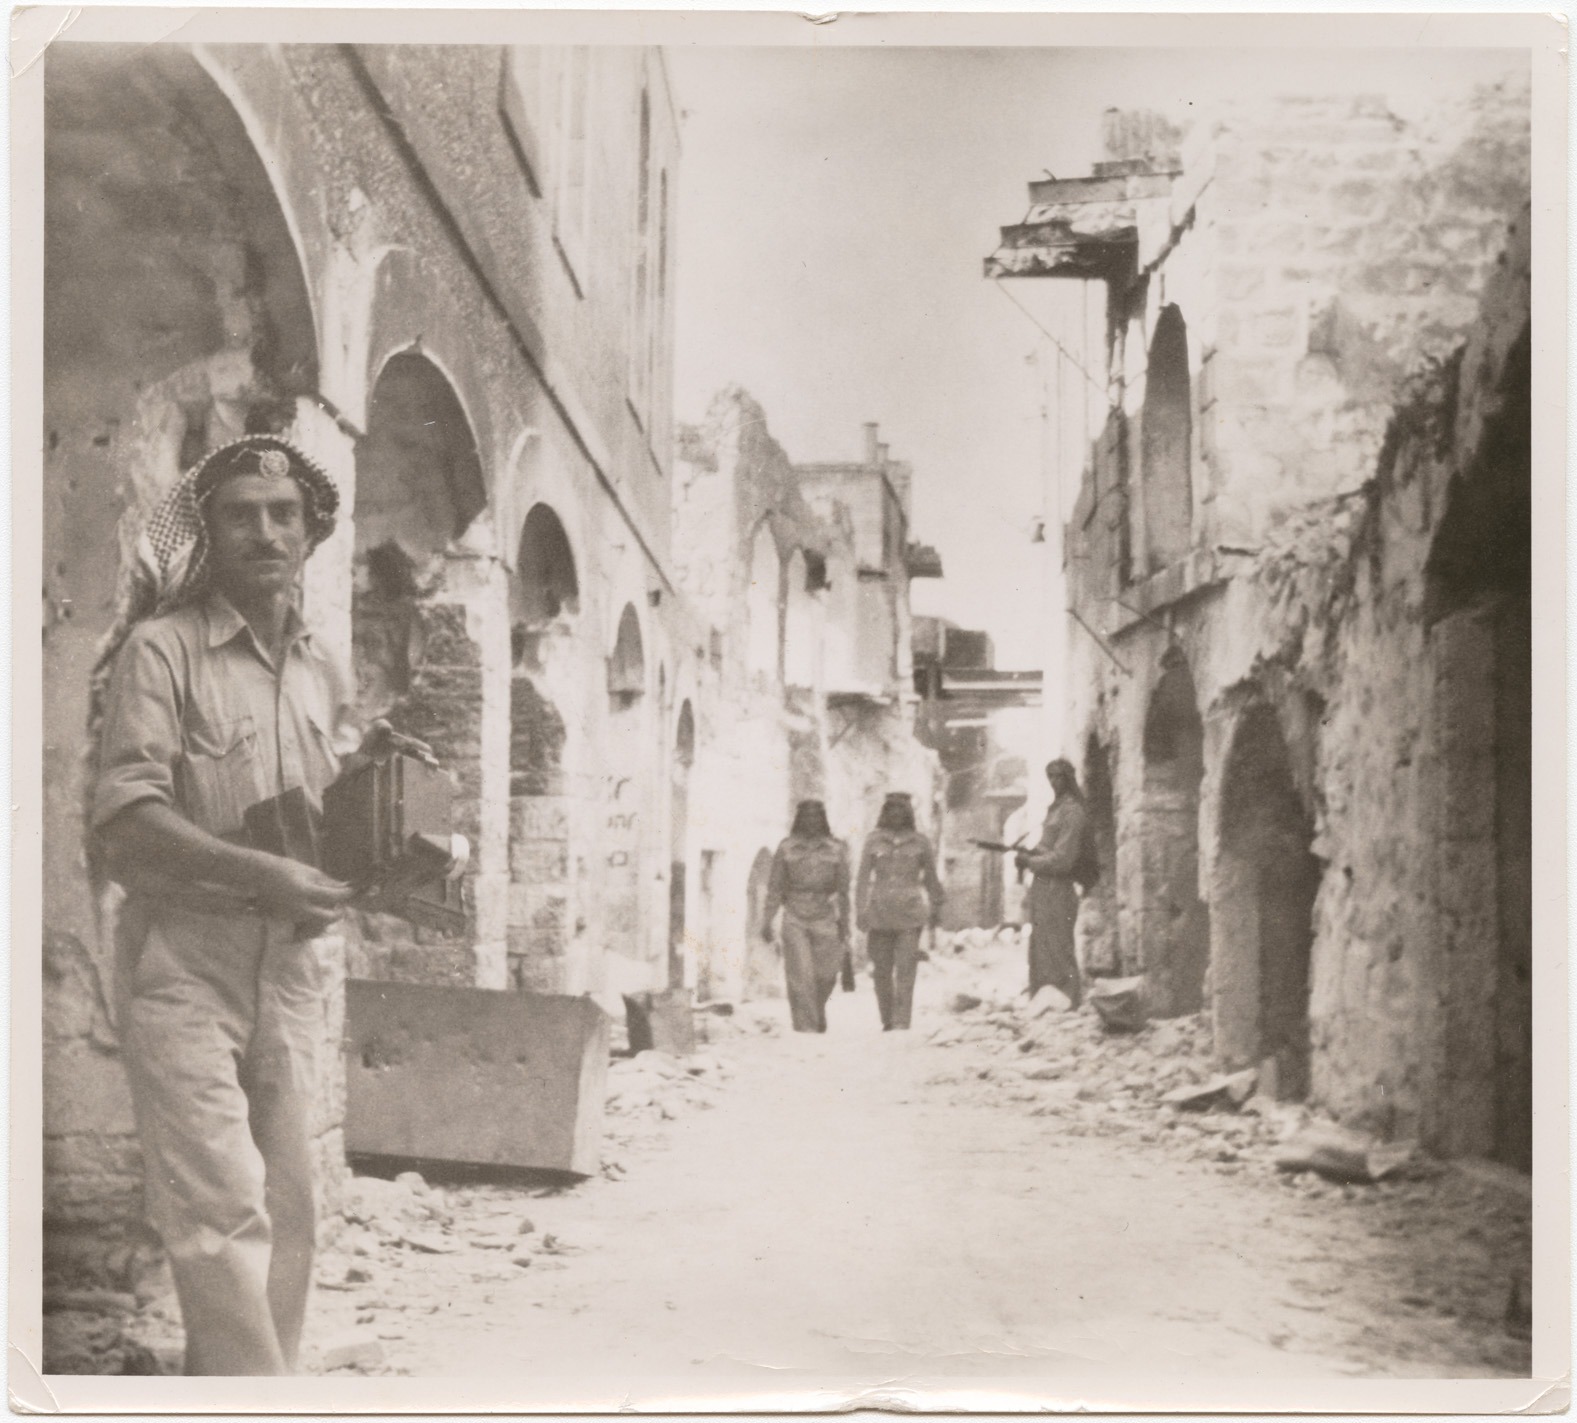 Jordanian soldier, Jersualem, Palestine, 1967. Photographed by Bedros Doumanian. Gelatin silver developing-out paper print, 12 x 13.3 cm. 0026do00027, 0026do – Bedros Doumanian collection, courtesy of the Arab Image Foundation, Beirut.